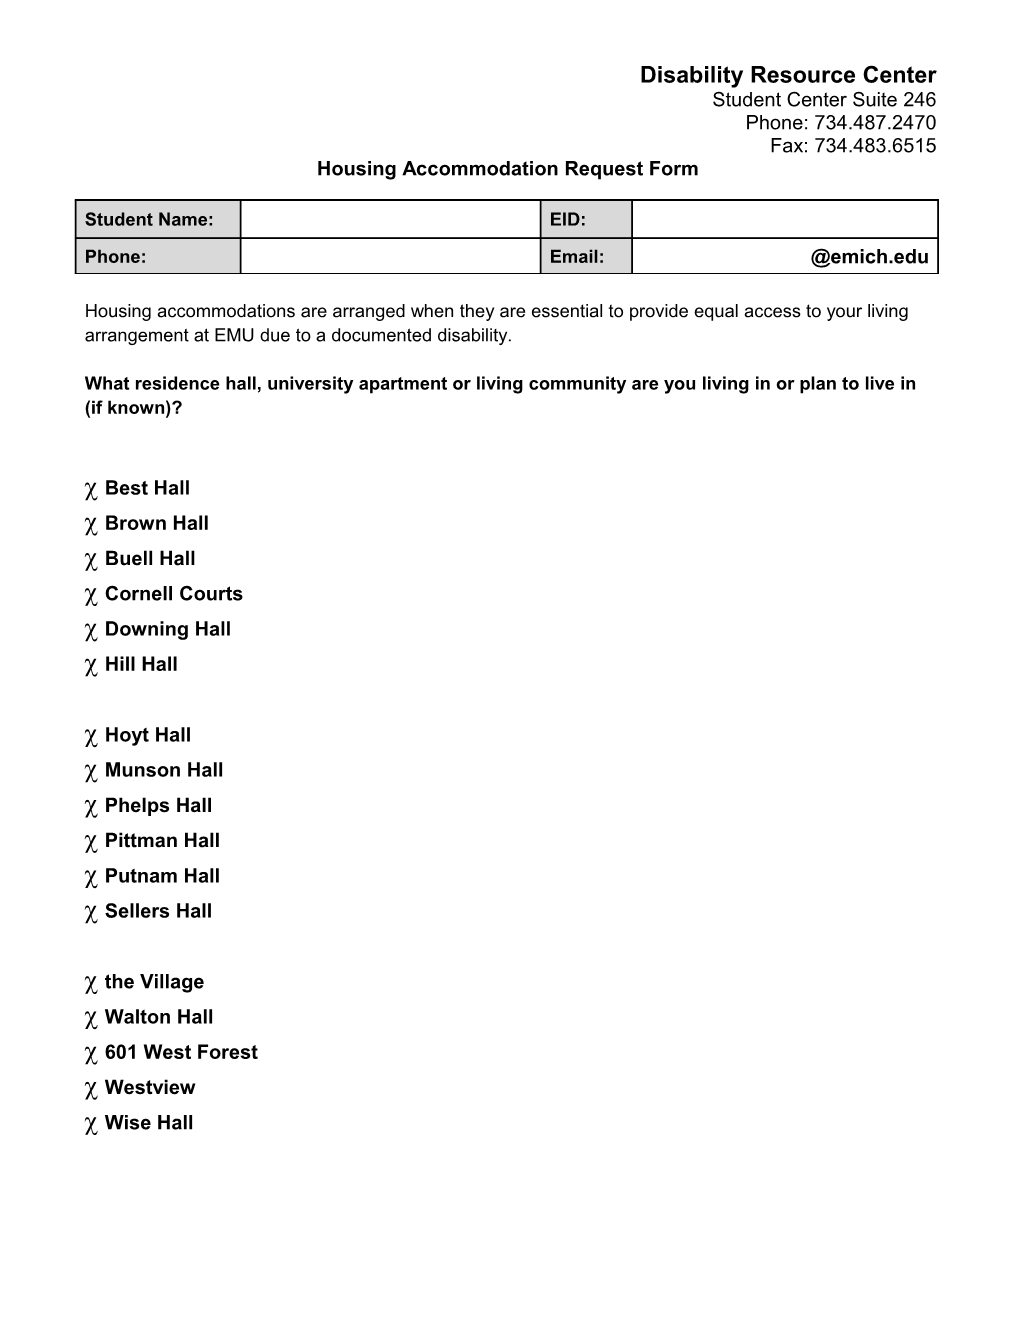 Housing Accommodation Request Form